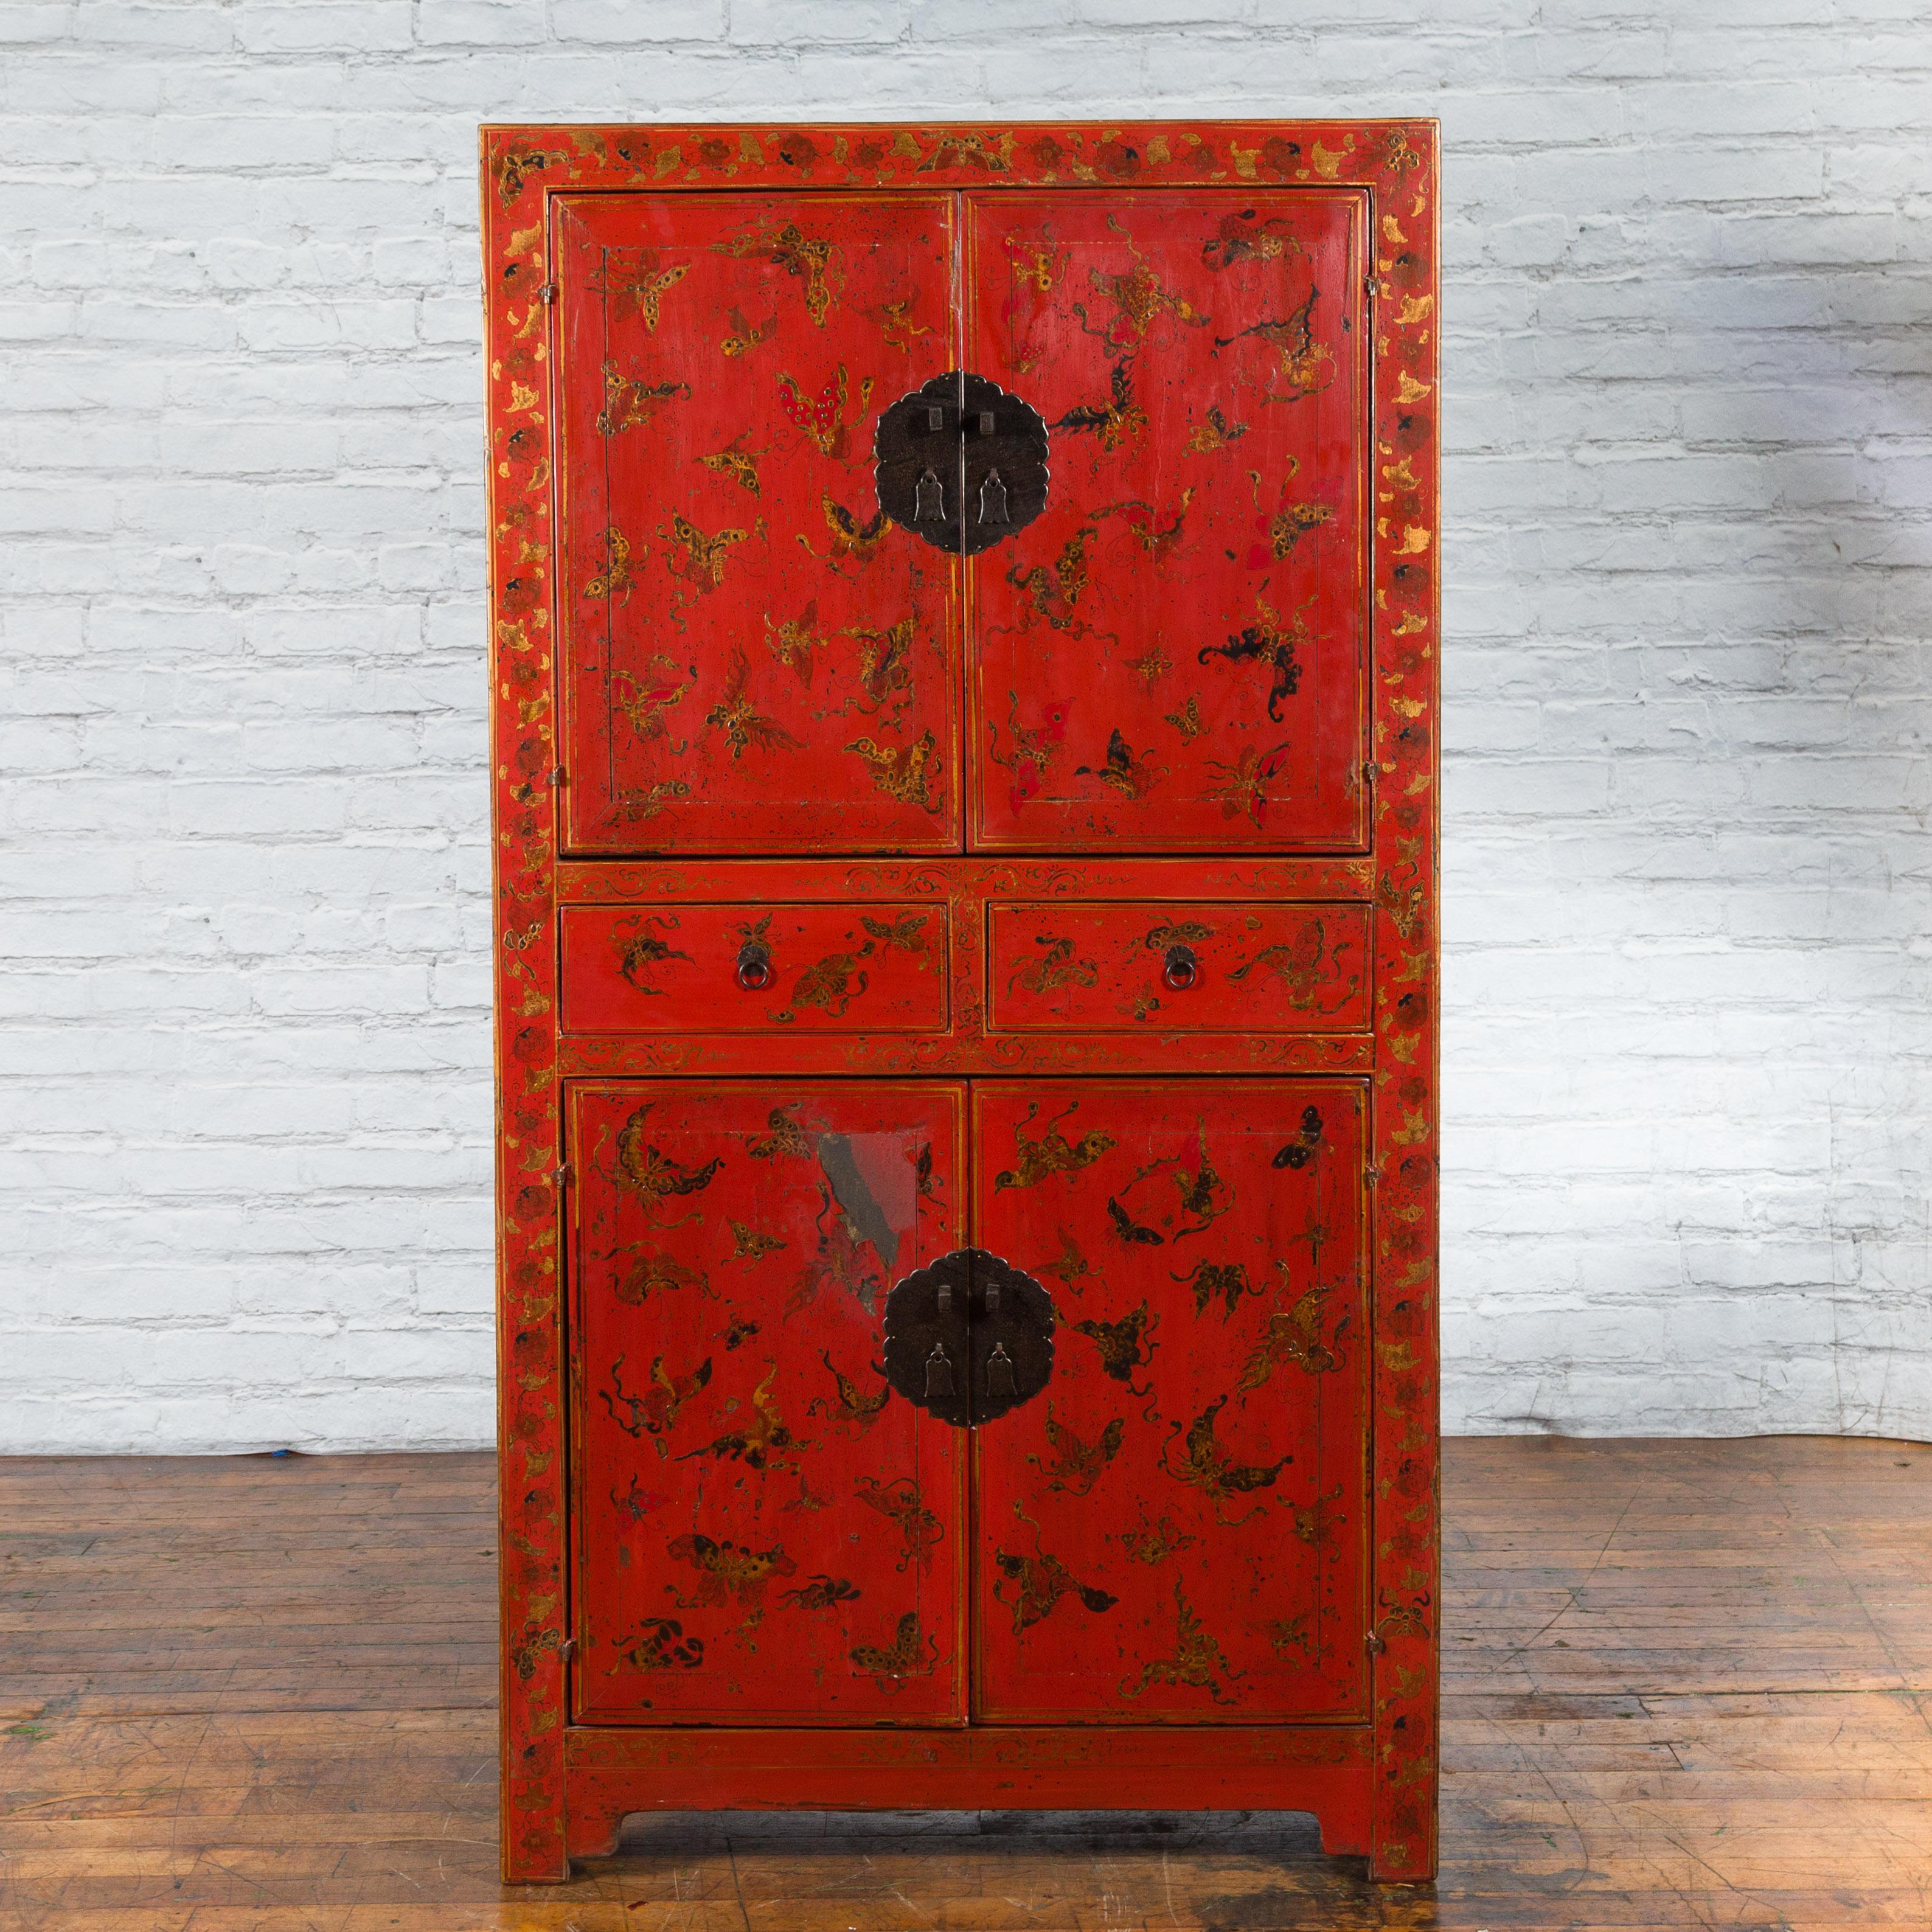 Chinese Qing Dynasty 19th Century Red Lacquer Cabinet with Butterfly Décor In Fair Condition For Sale In Yonkers, NY